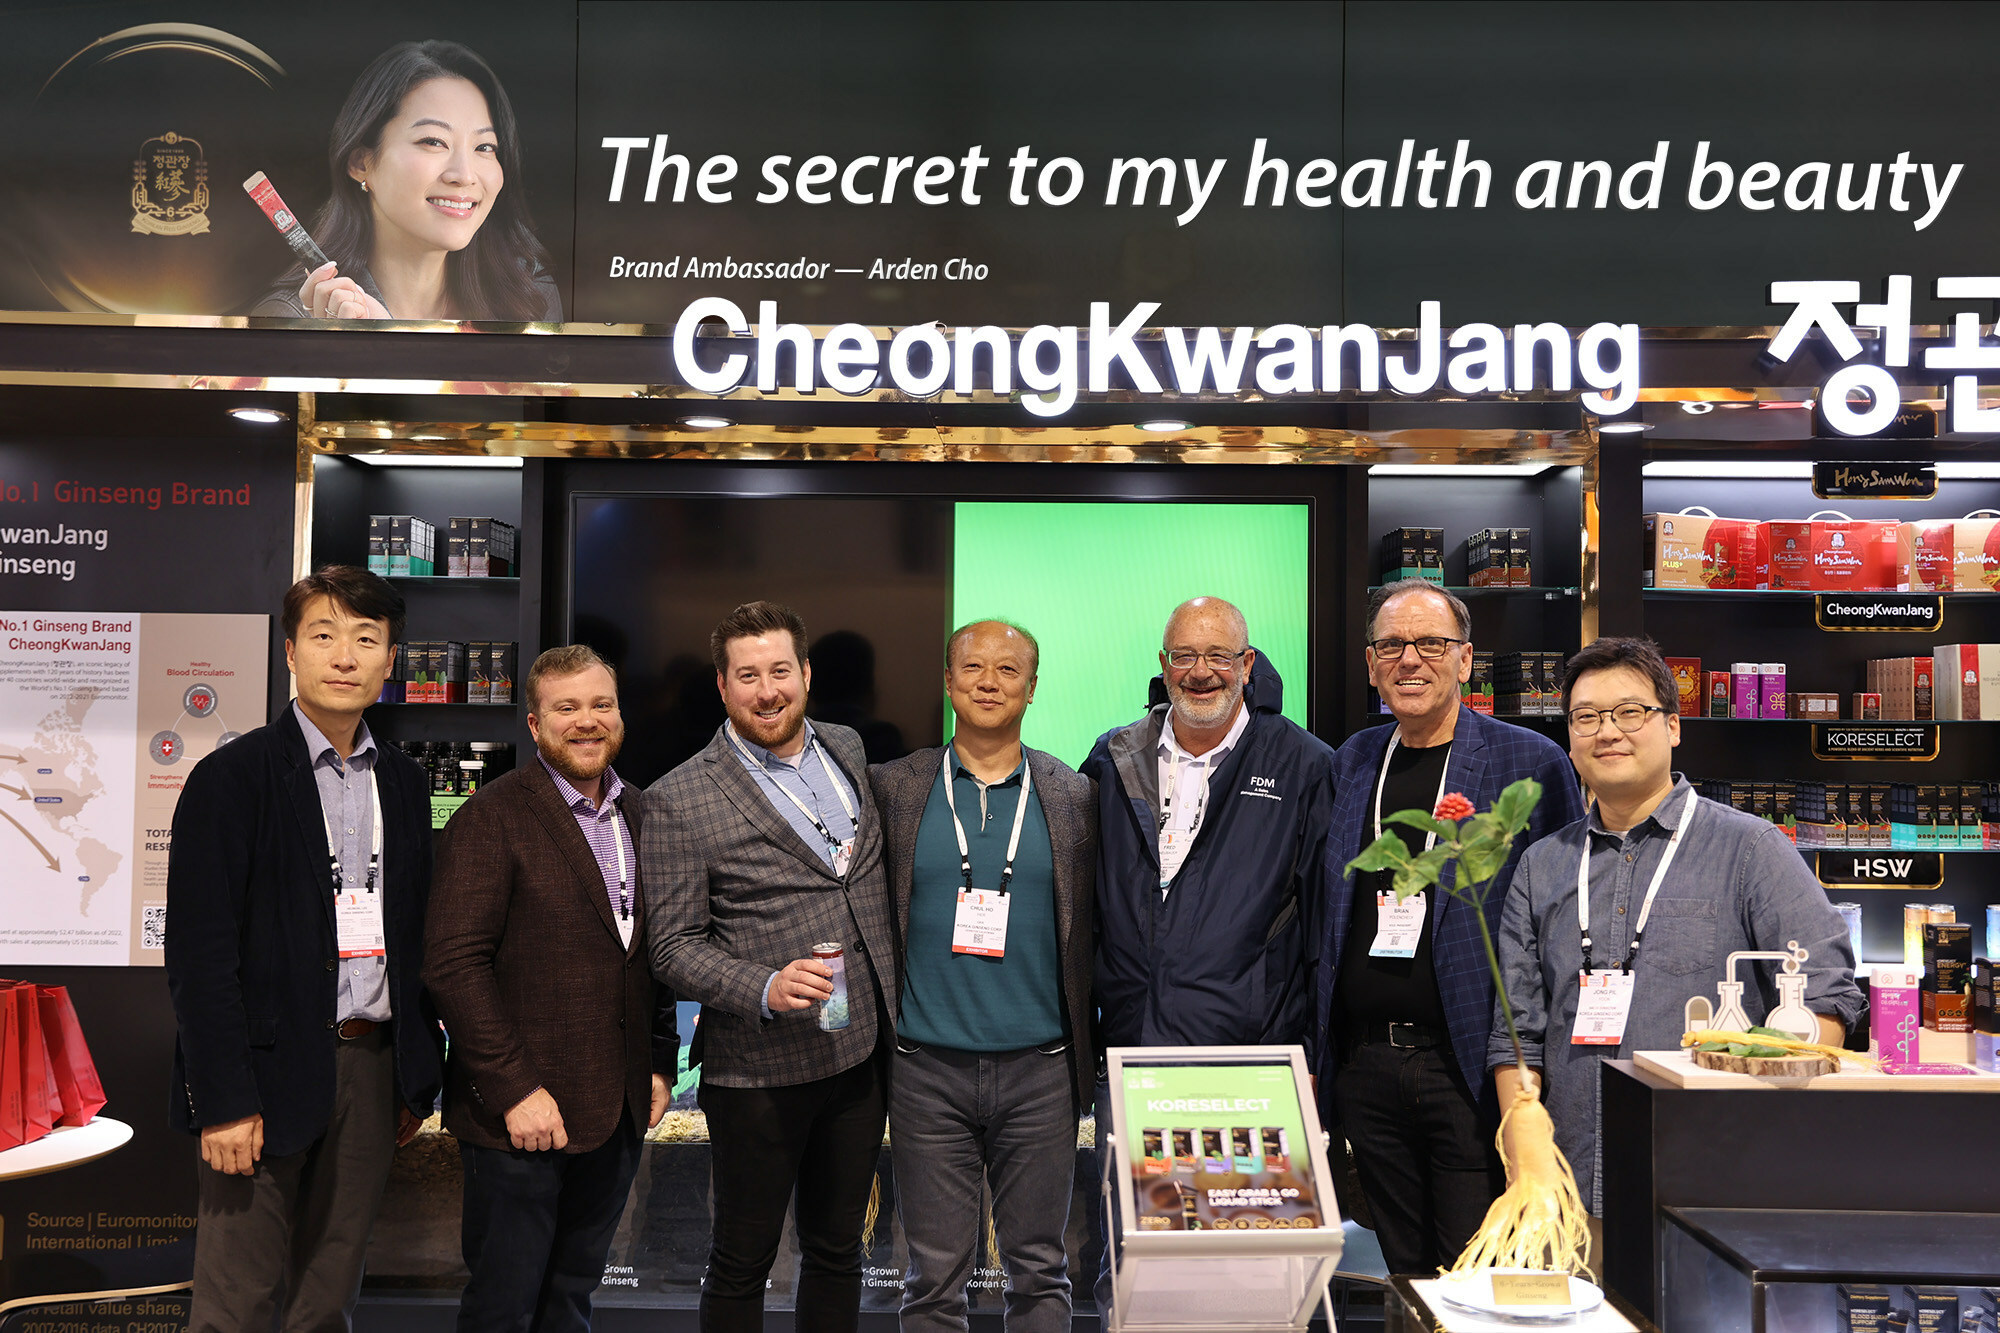 The World’s #1 Ginseng Brand, CheongKwanJang, opens U.S. R&D center in a major push to expand its American market share